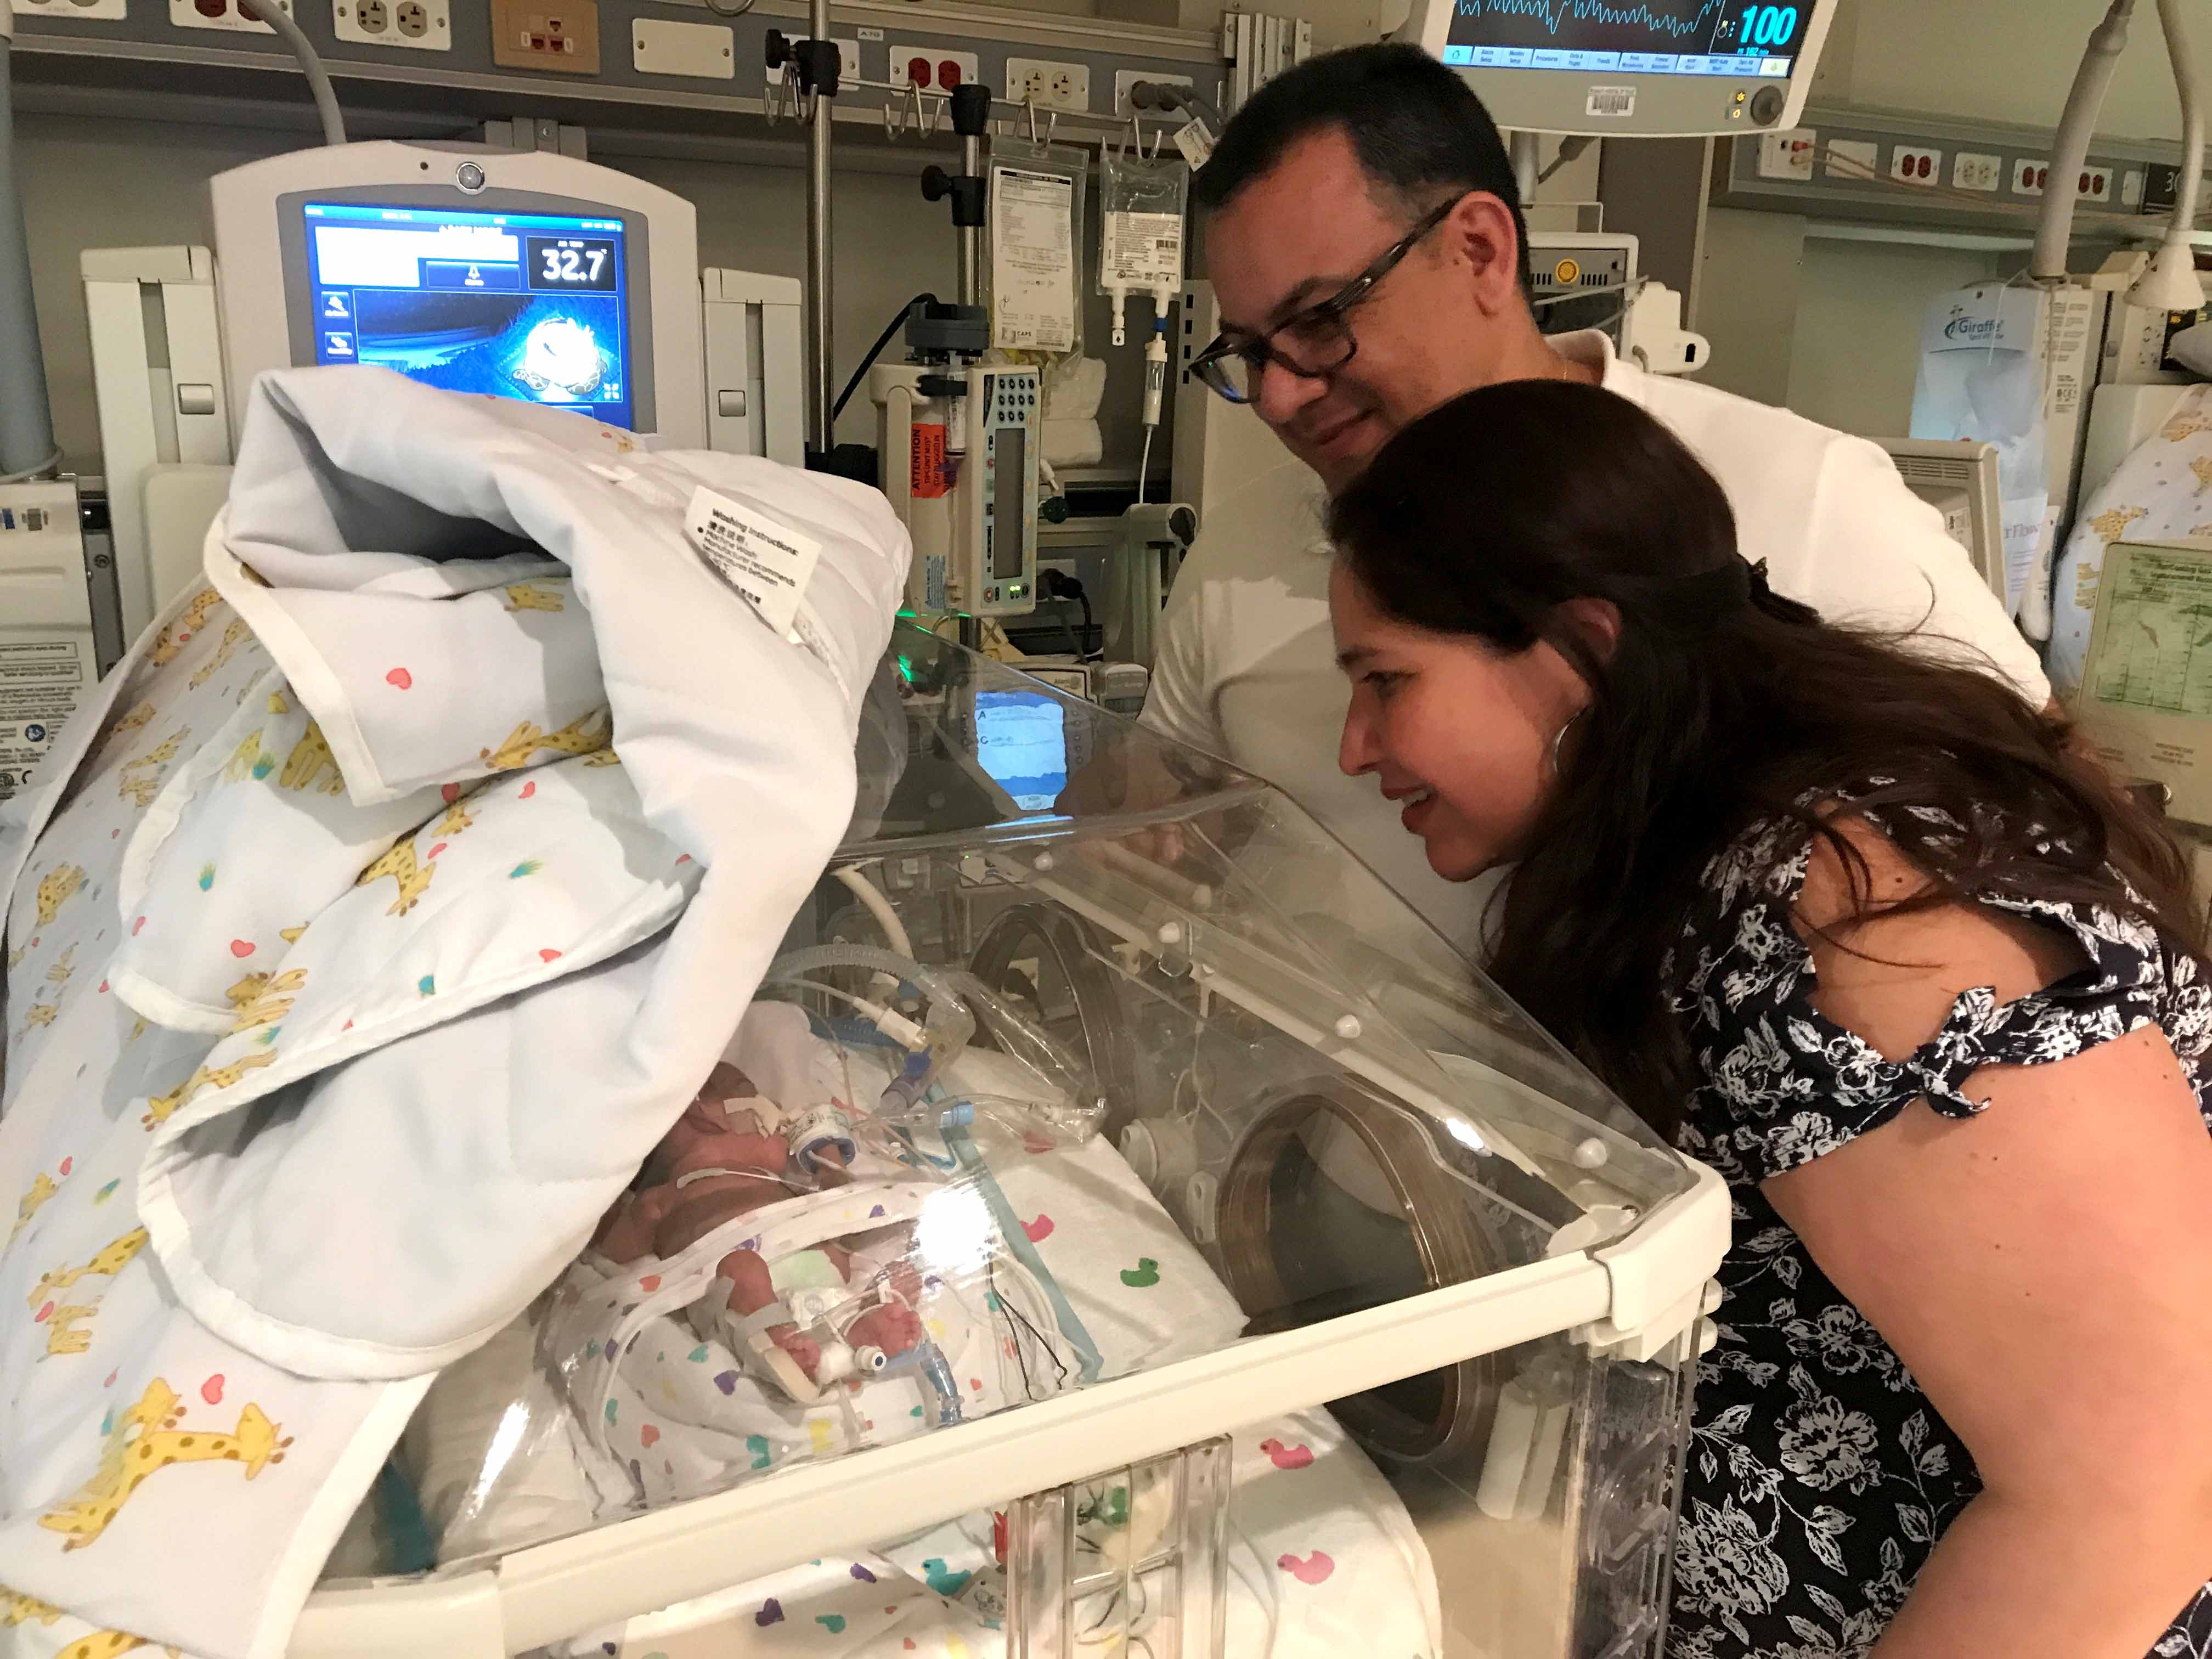 Siddhartha Rodriguez and Jesus Romero visit baby Amanda in the NICU at The Woman's Hospital of Texas.